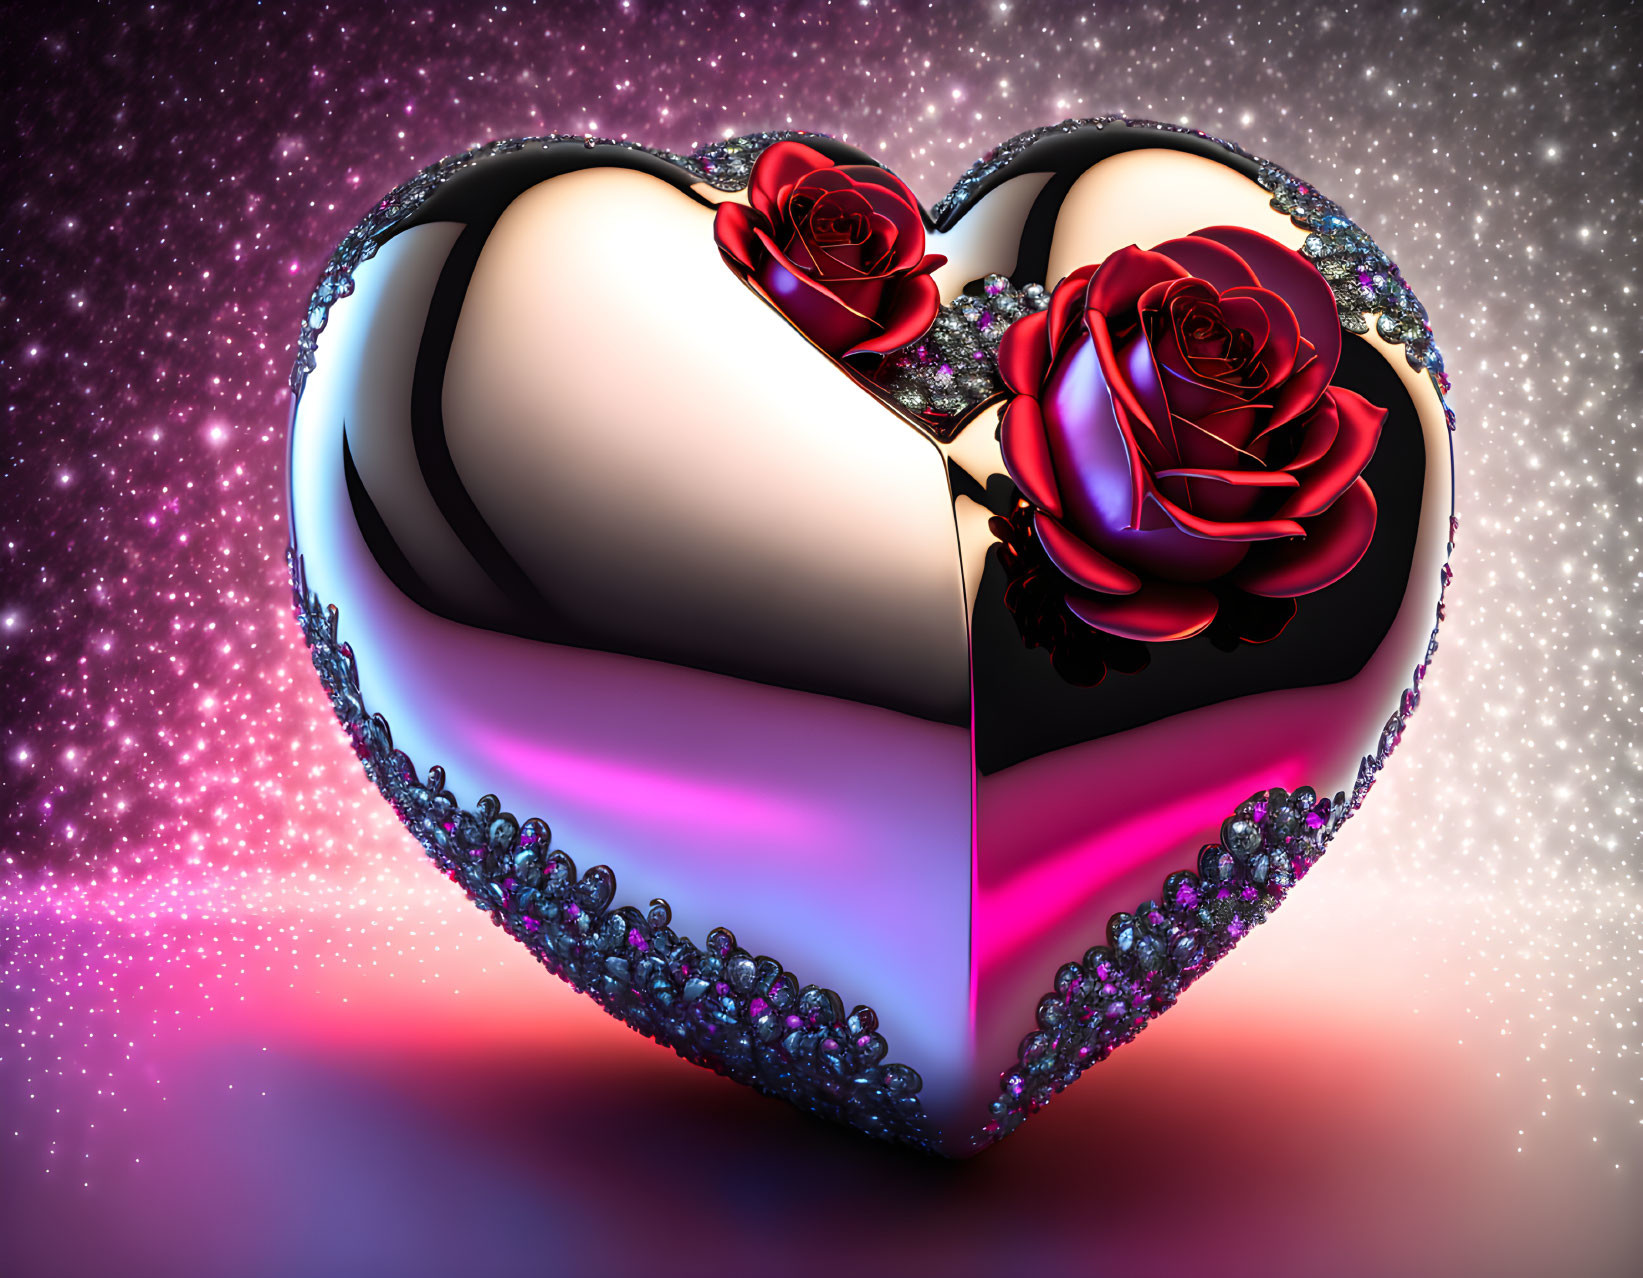 Heart-shaped object with roses and jeweled border on pink and purple background